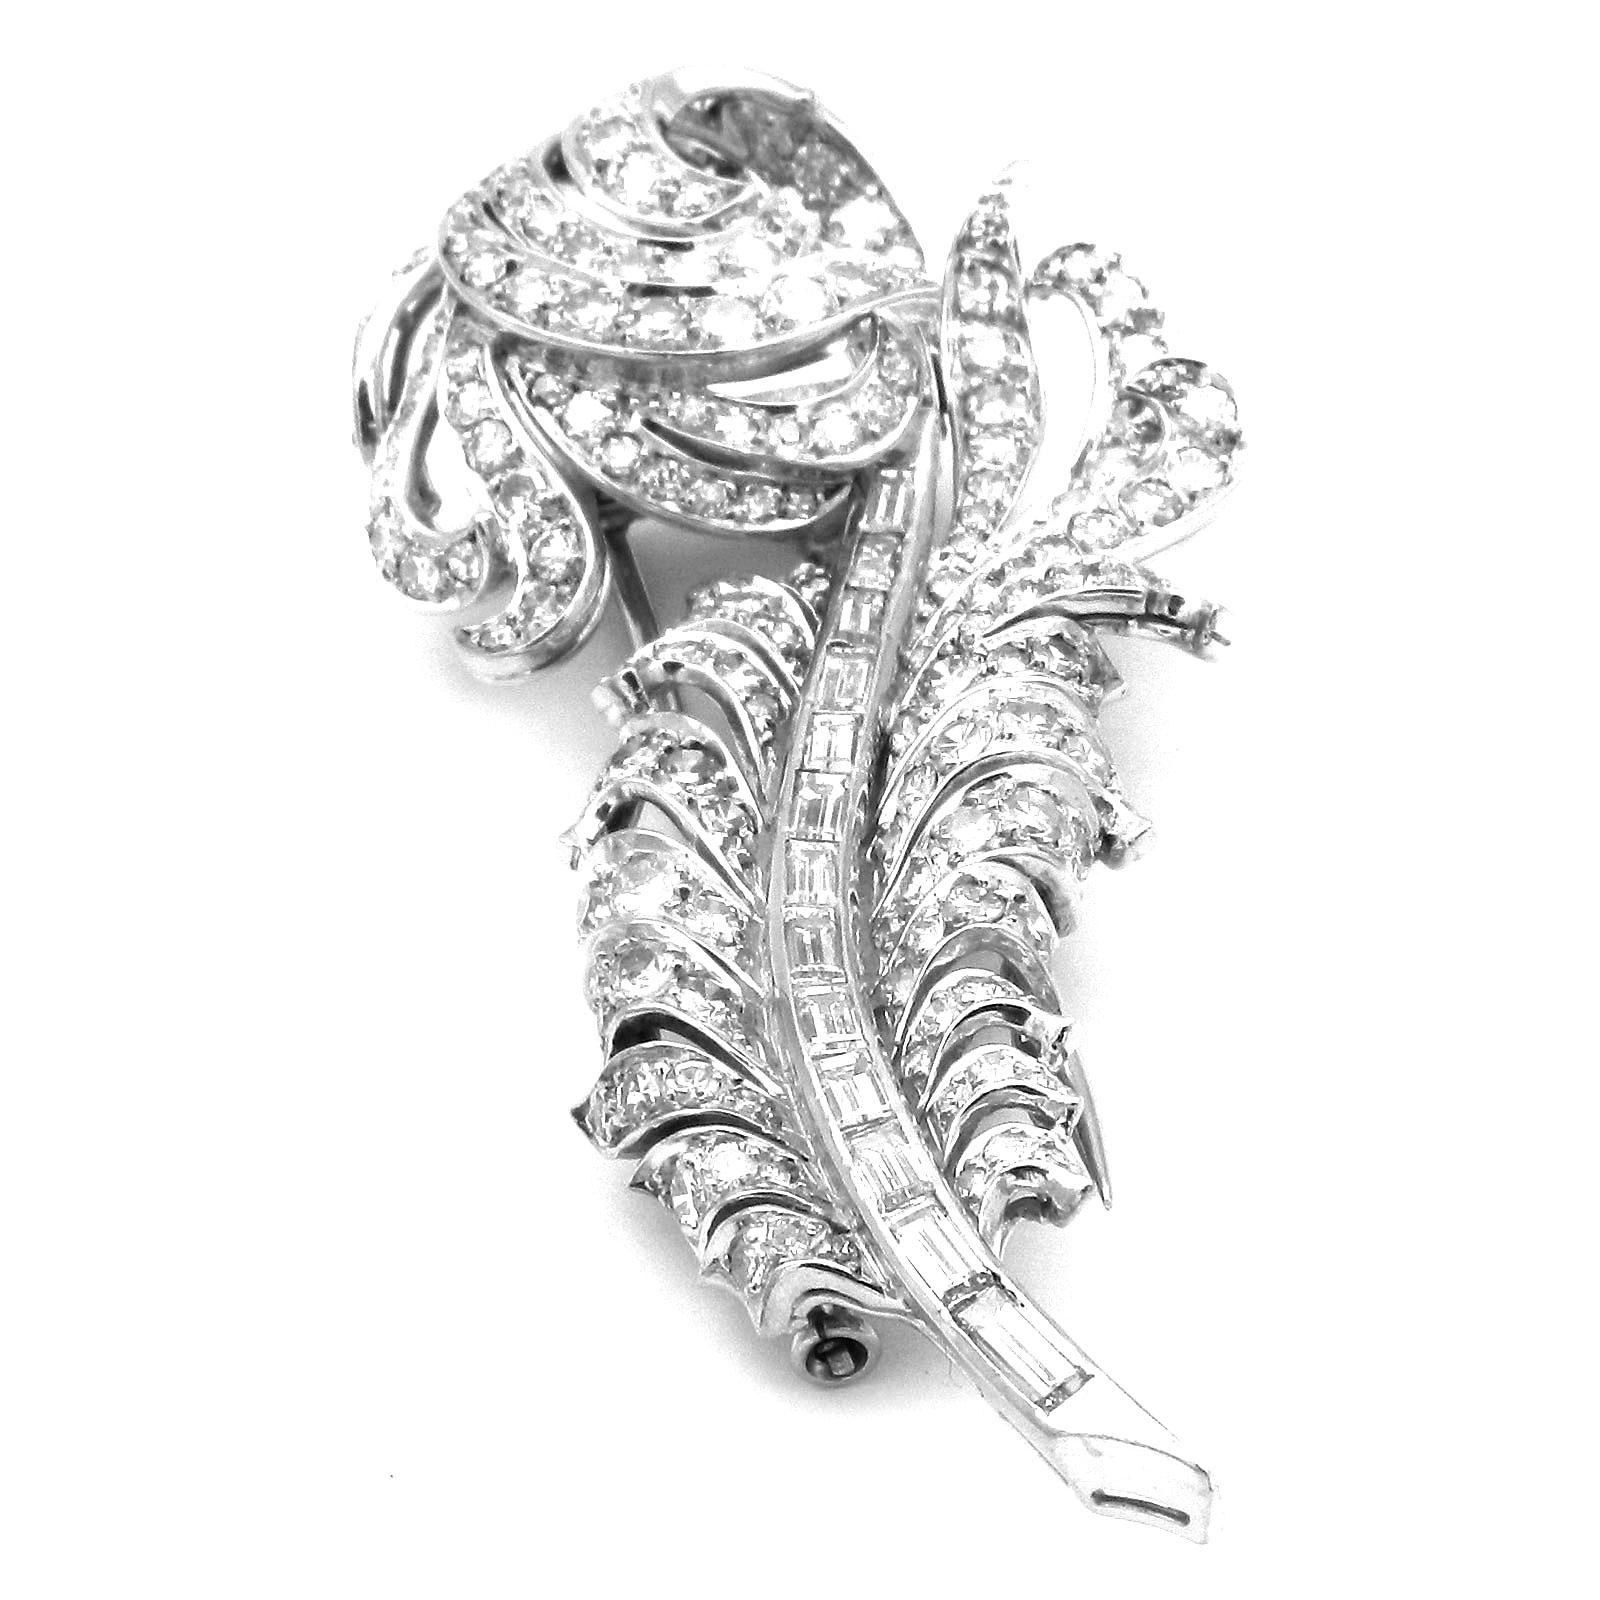 Retro 6 ct Diamond Feather Platinum Clip Brooch circa 1940

Very decorative diamond clip brooch of impressive size, in the shape of a magnificent feather, set with 178 radiant diamonds totaling 5.95 ct. The quill pen is accentuated with baguette